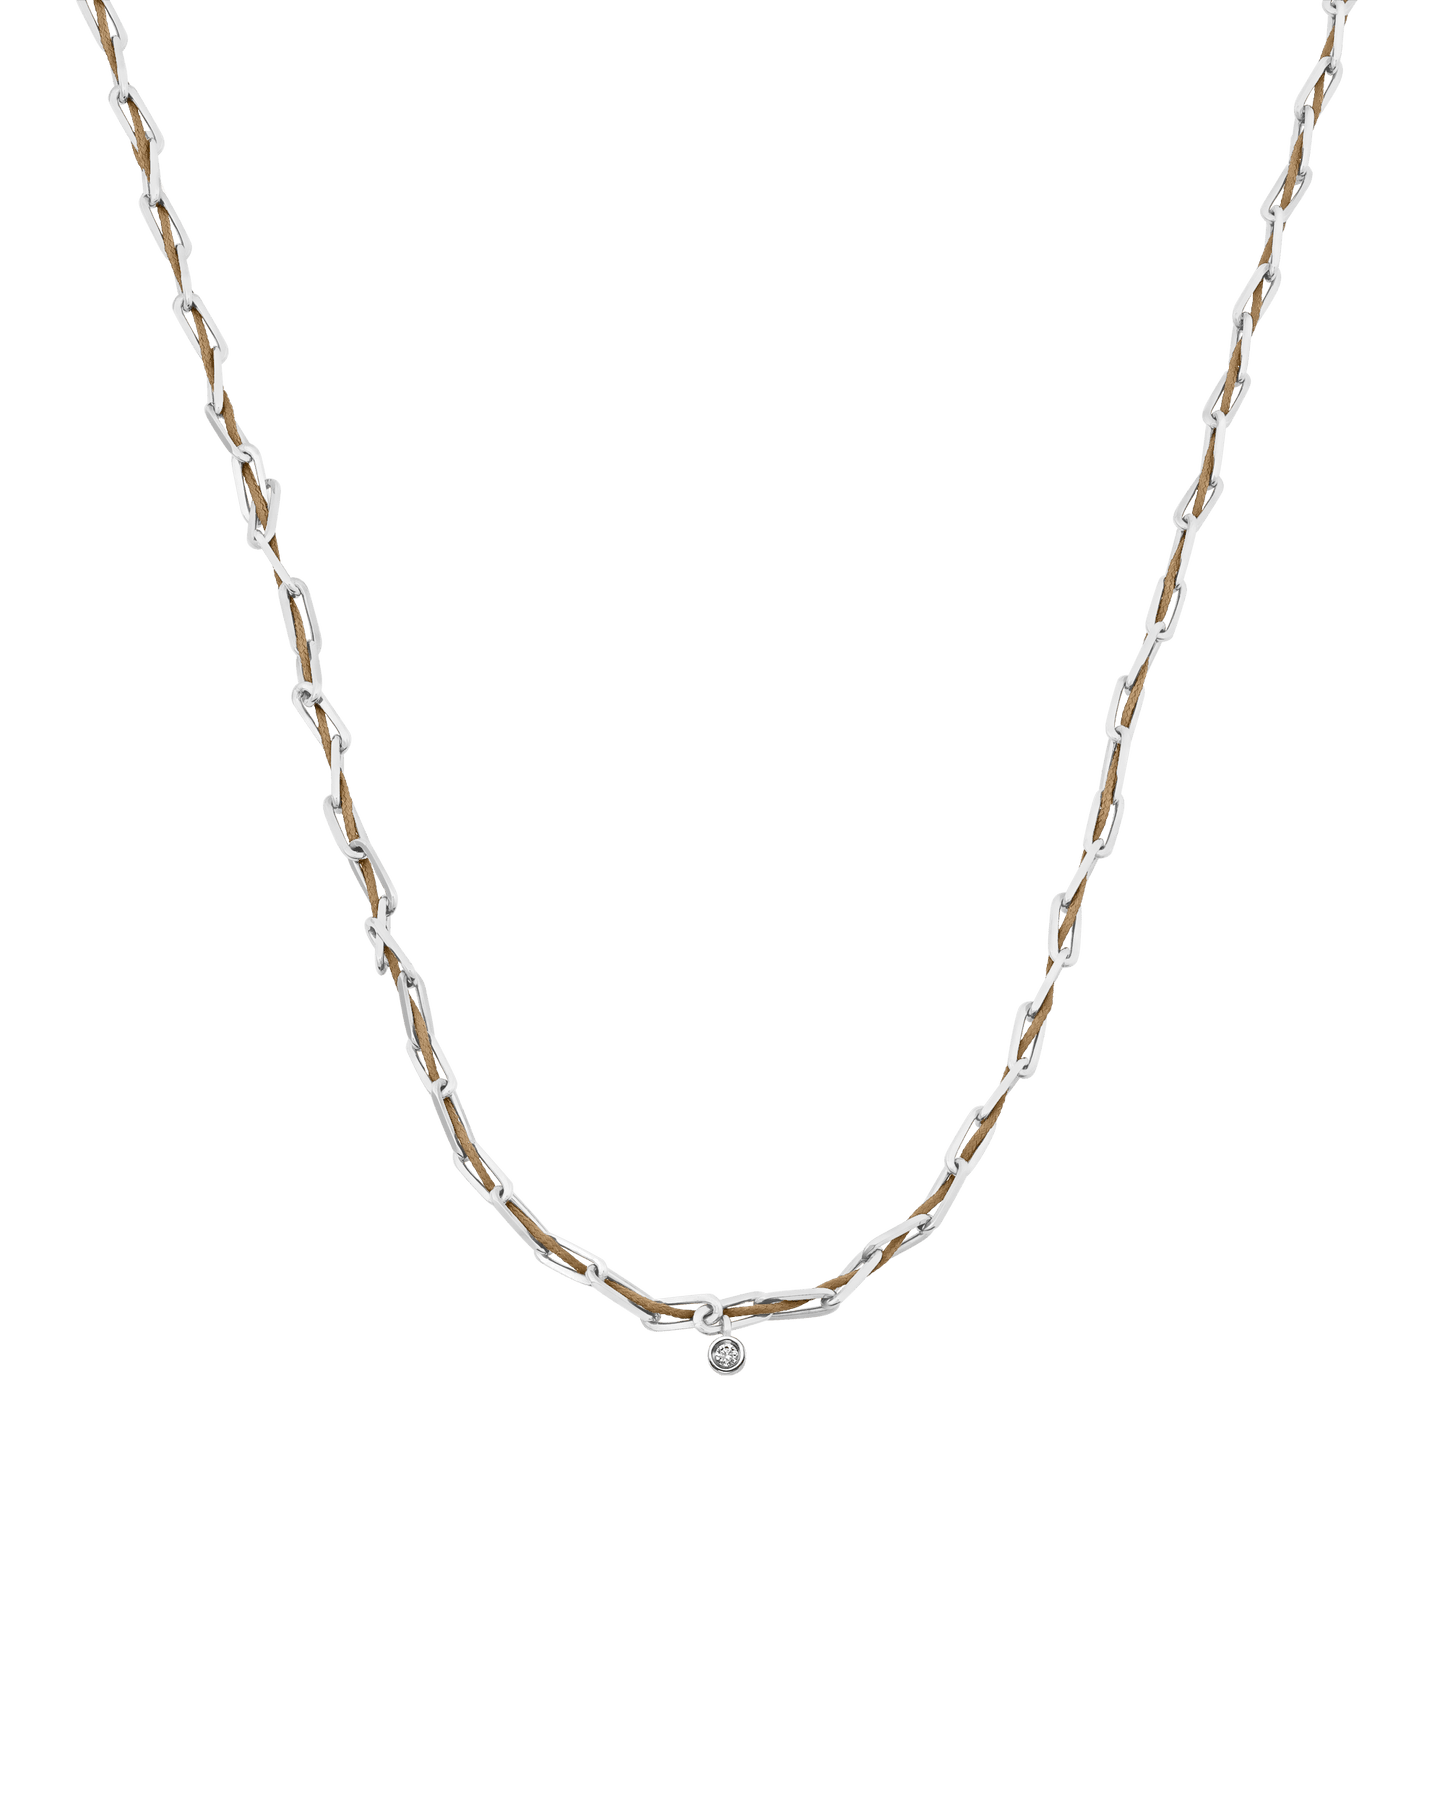 Twine Diamond Necklace - 925 Sterling Silver Necklaces magal-dev Camel Small: 0.03ct 16"